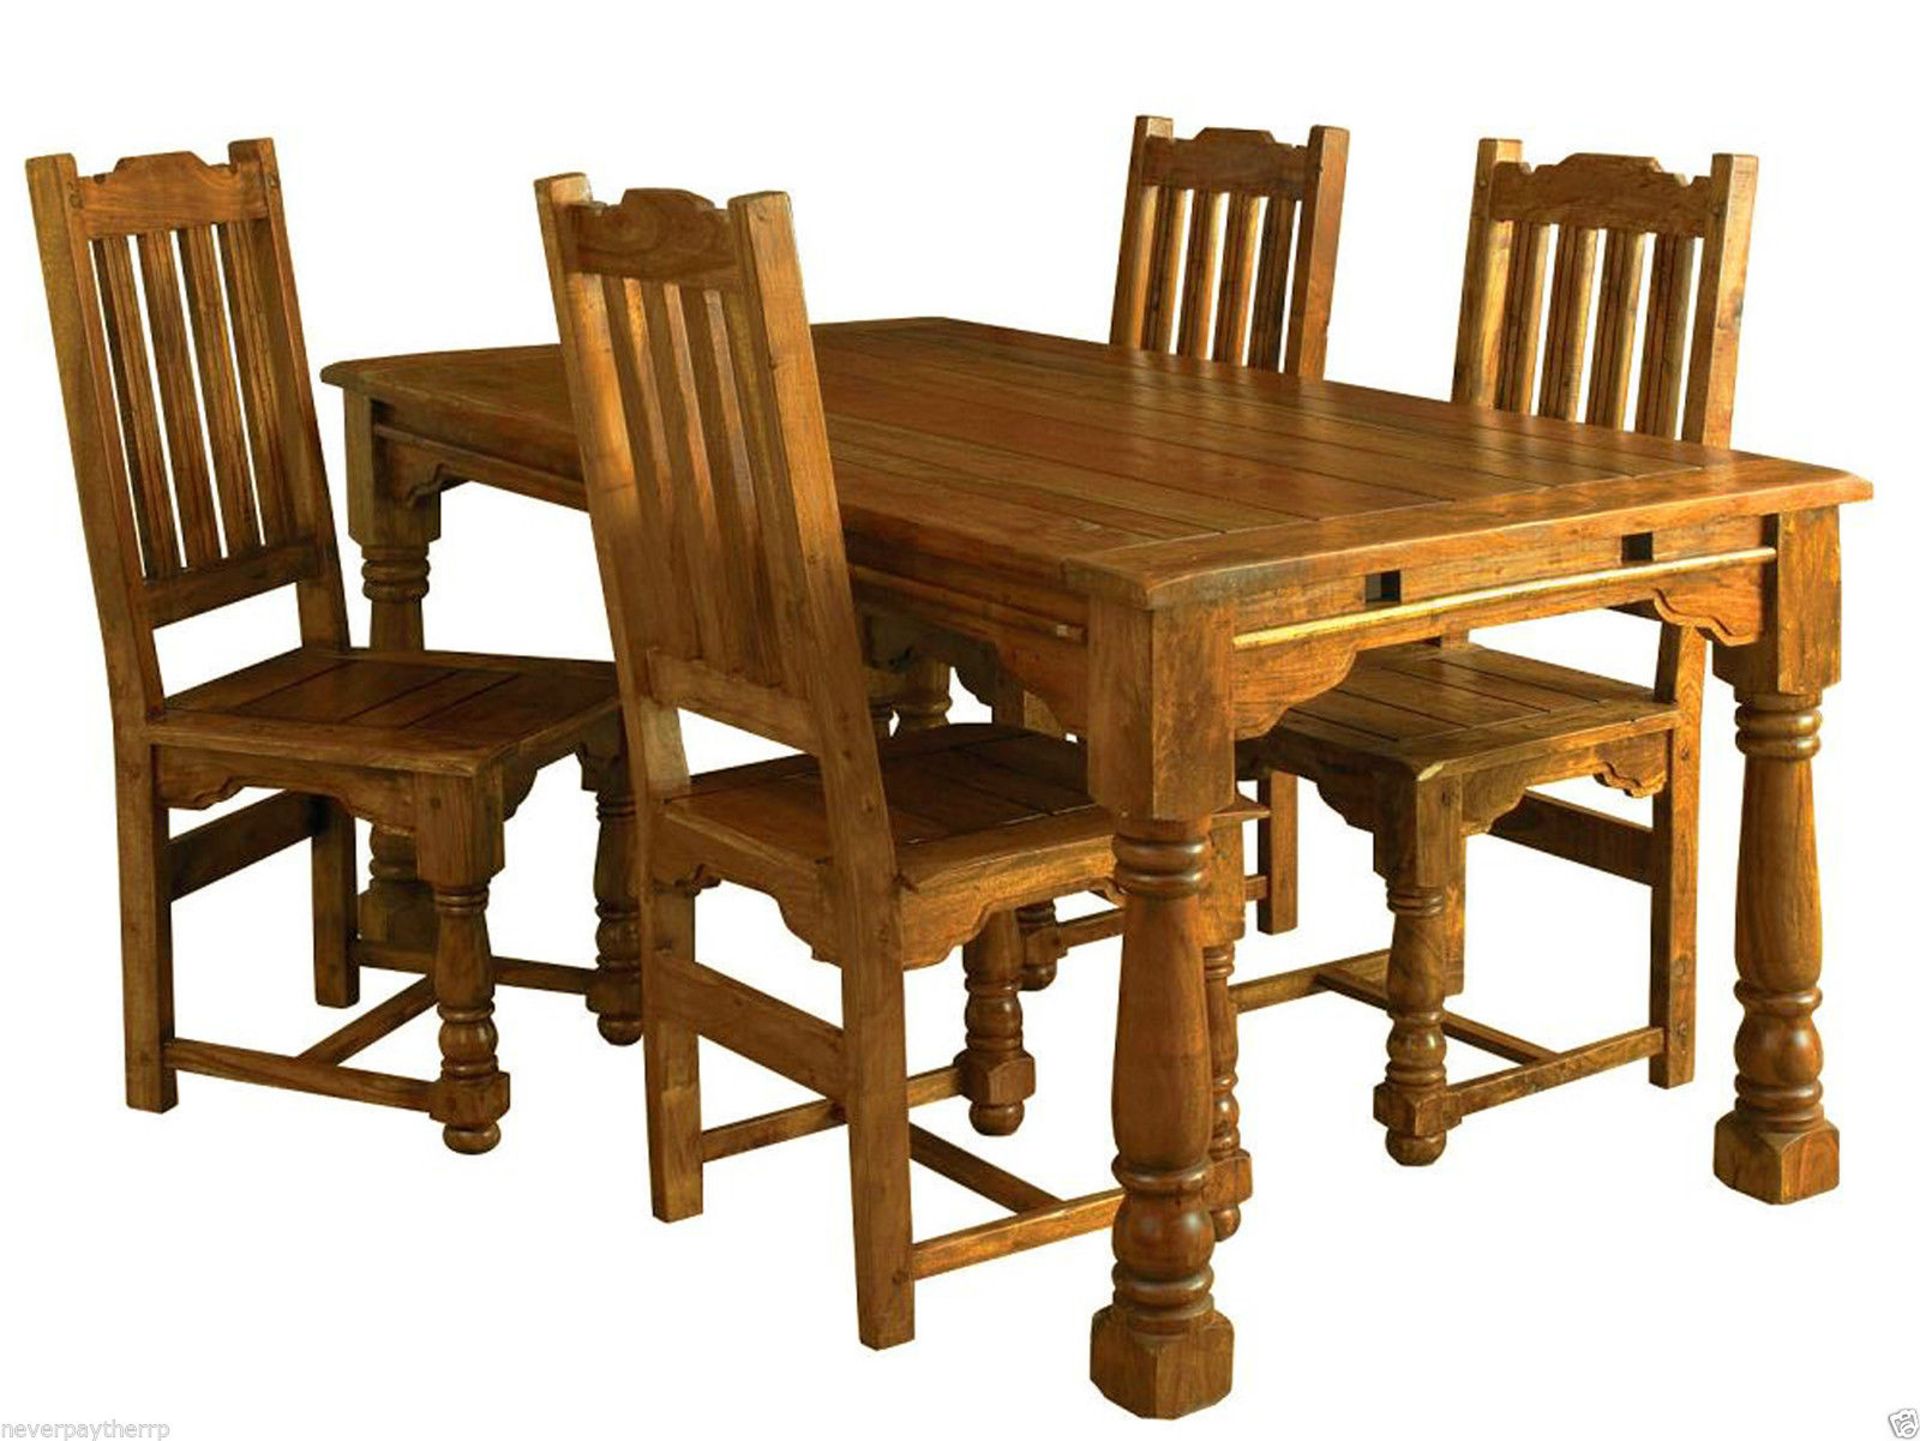 NEW Granary SET of 4 Dining Chairs, Solid Acacia Wood TPP008 RRP £77.20 each. New & boxed perfect